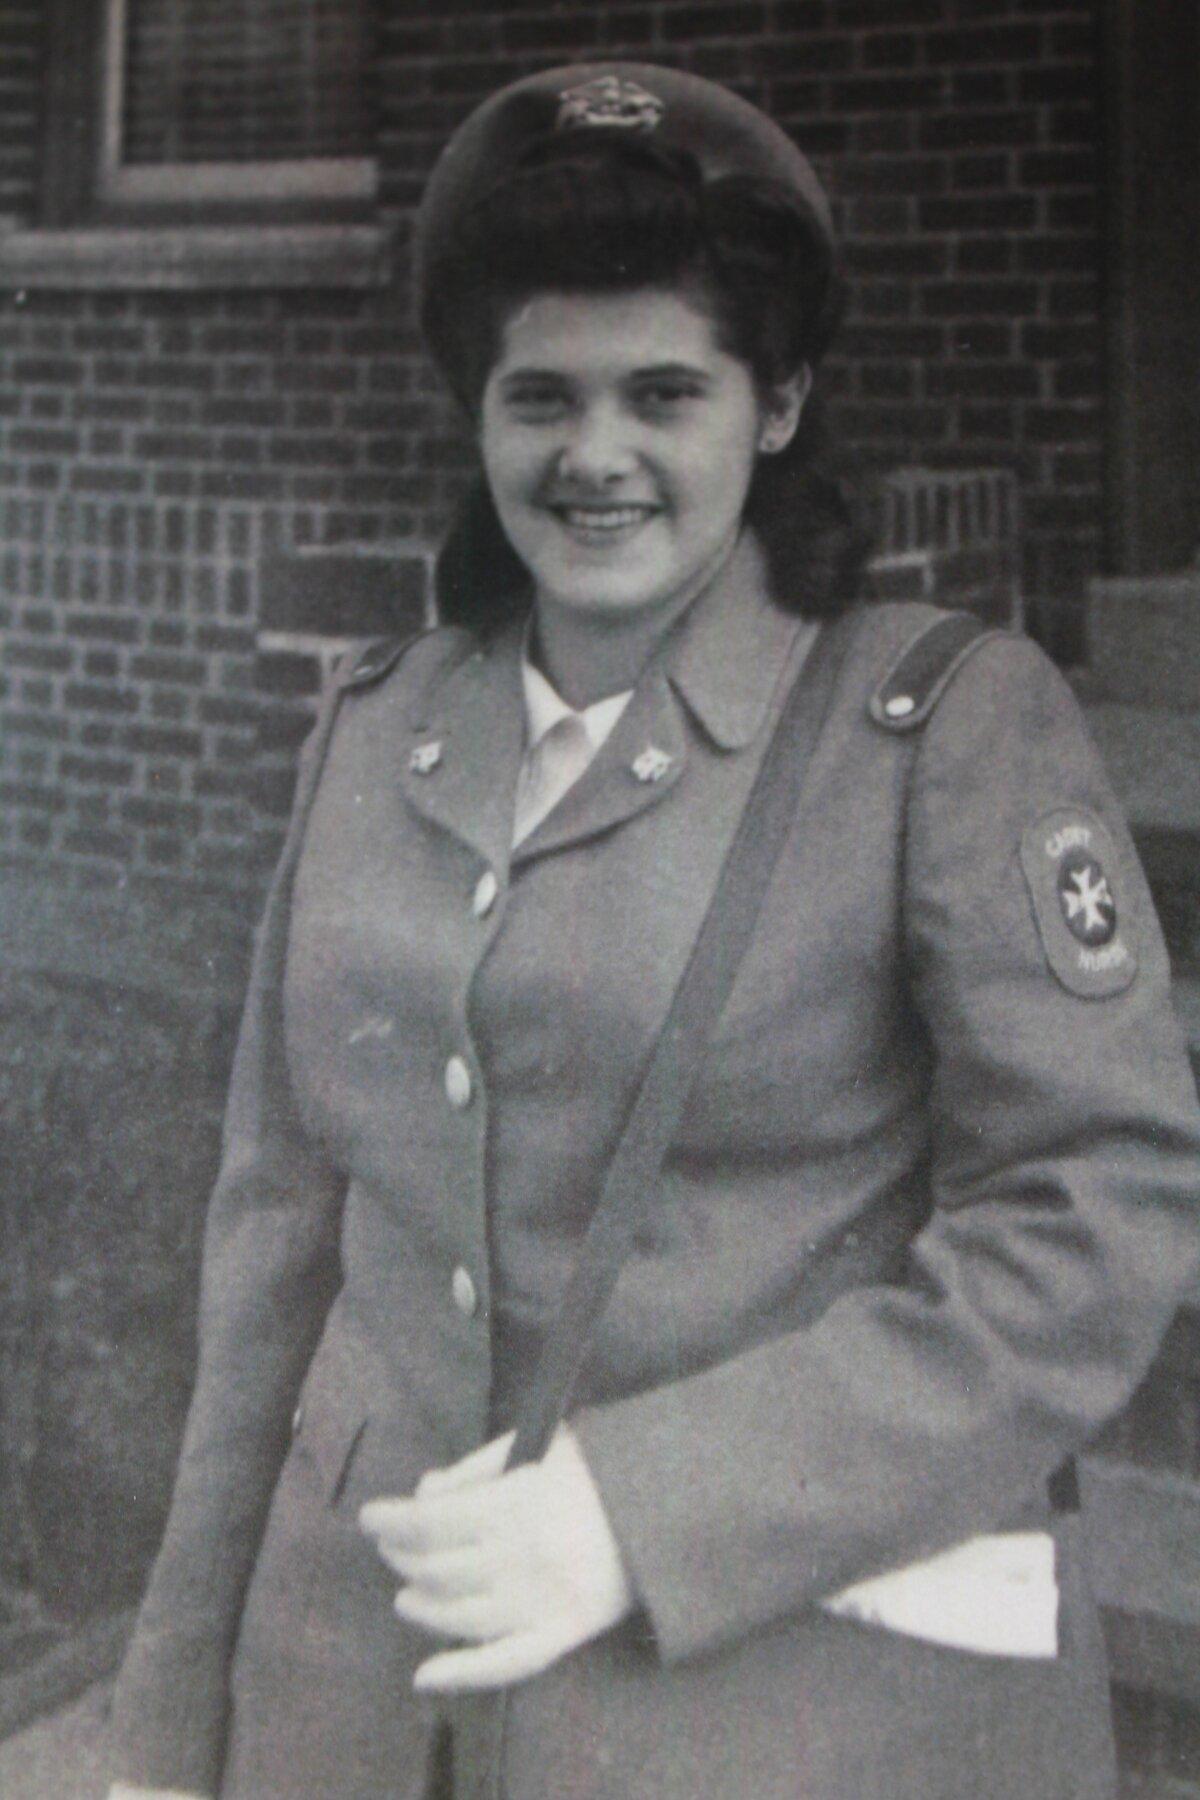 Emily Schacht, who served as a cadet nurse in the Connecticut area. (Courtesy of Eileen DeGaetano)